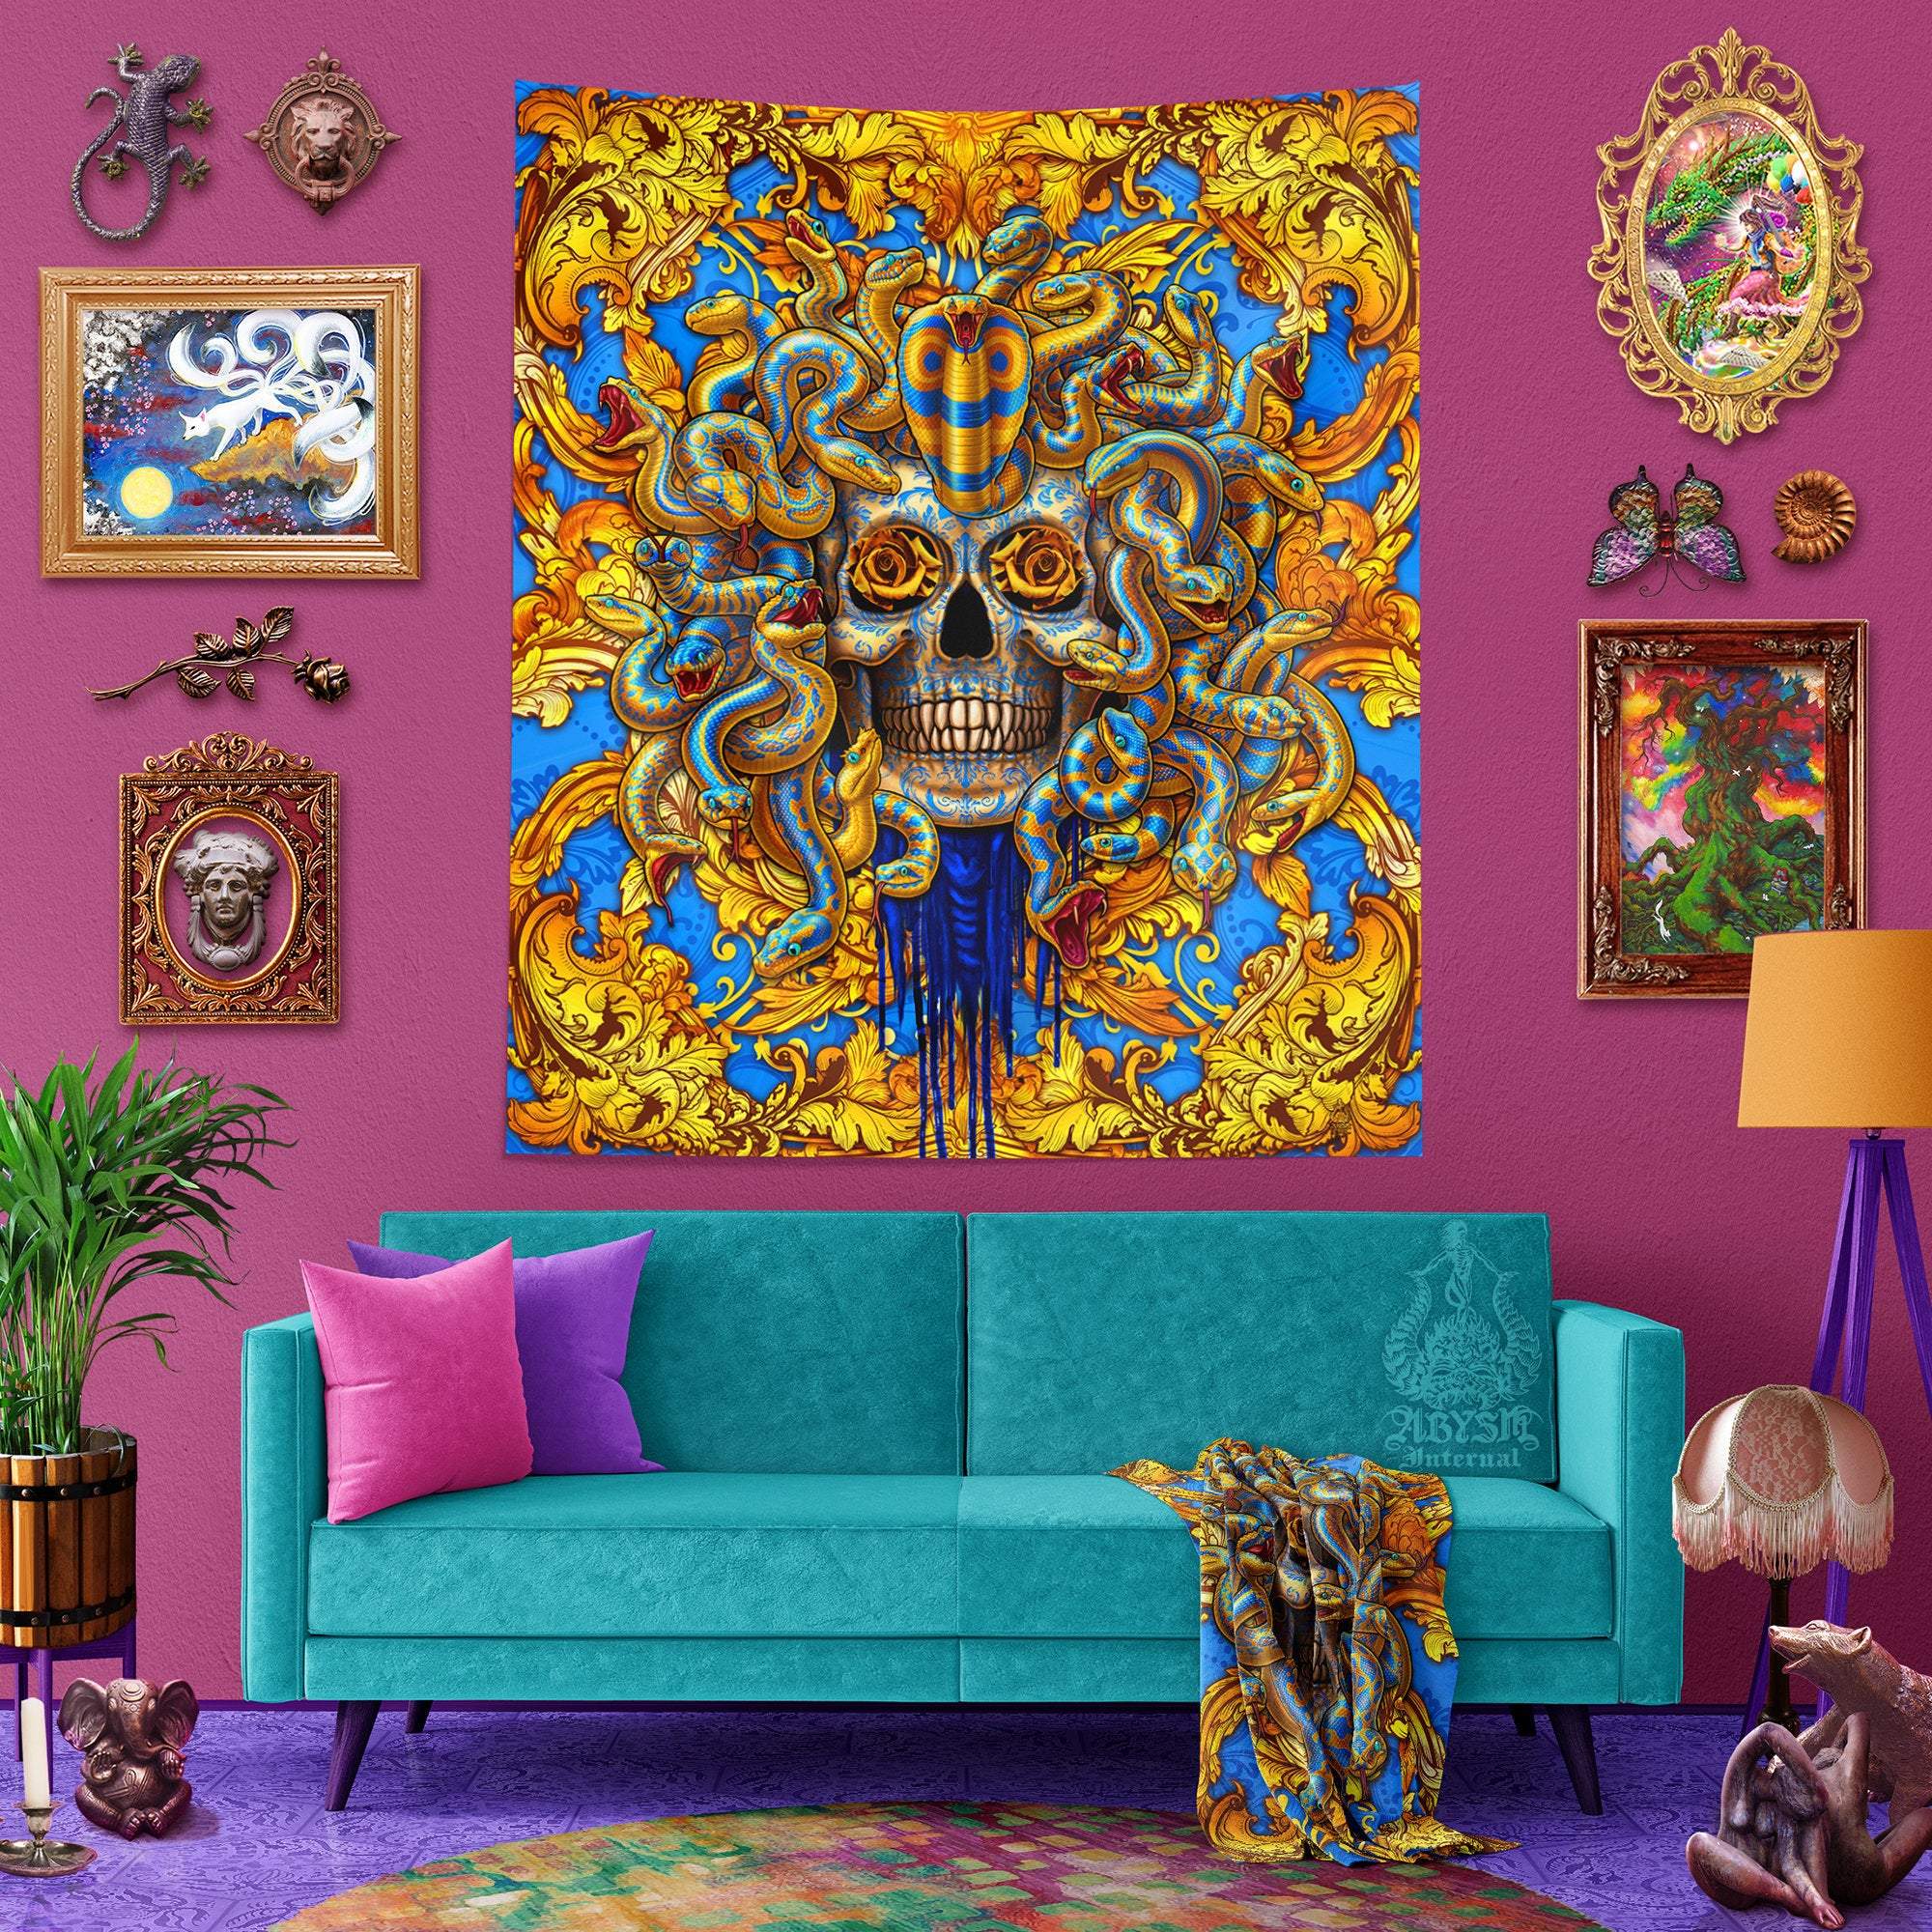 Skull Tapestry, Medusa Art Print, Macabre Decor, Eclectic and Funky - Cyan & Gold Snakes - Abysm Internal